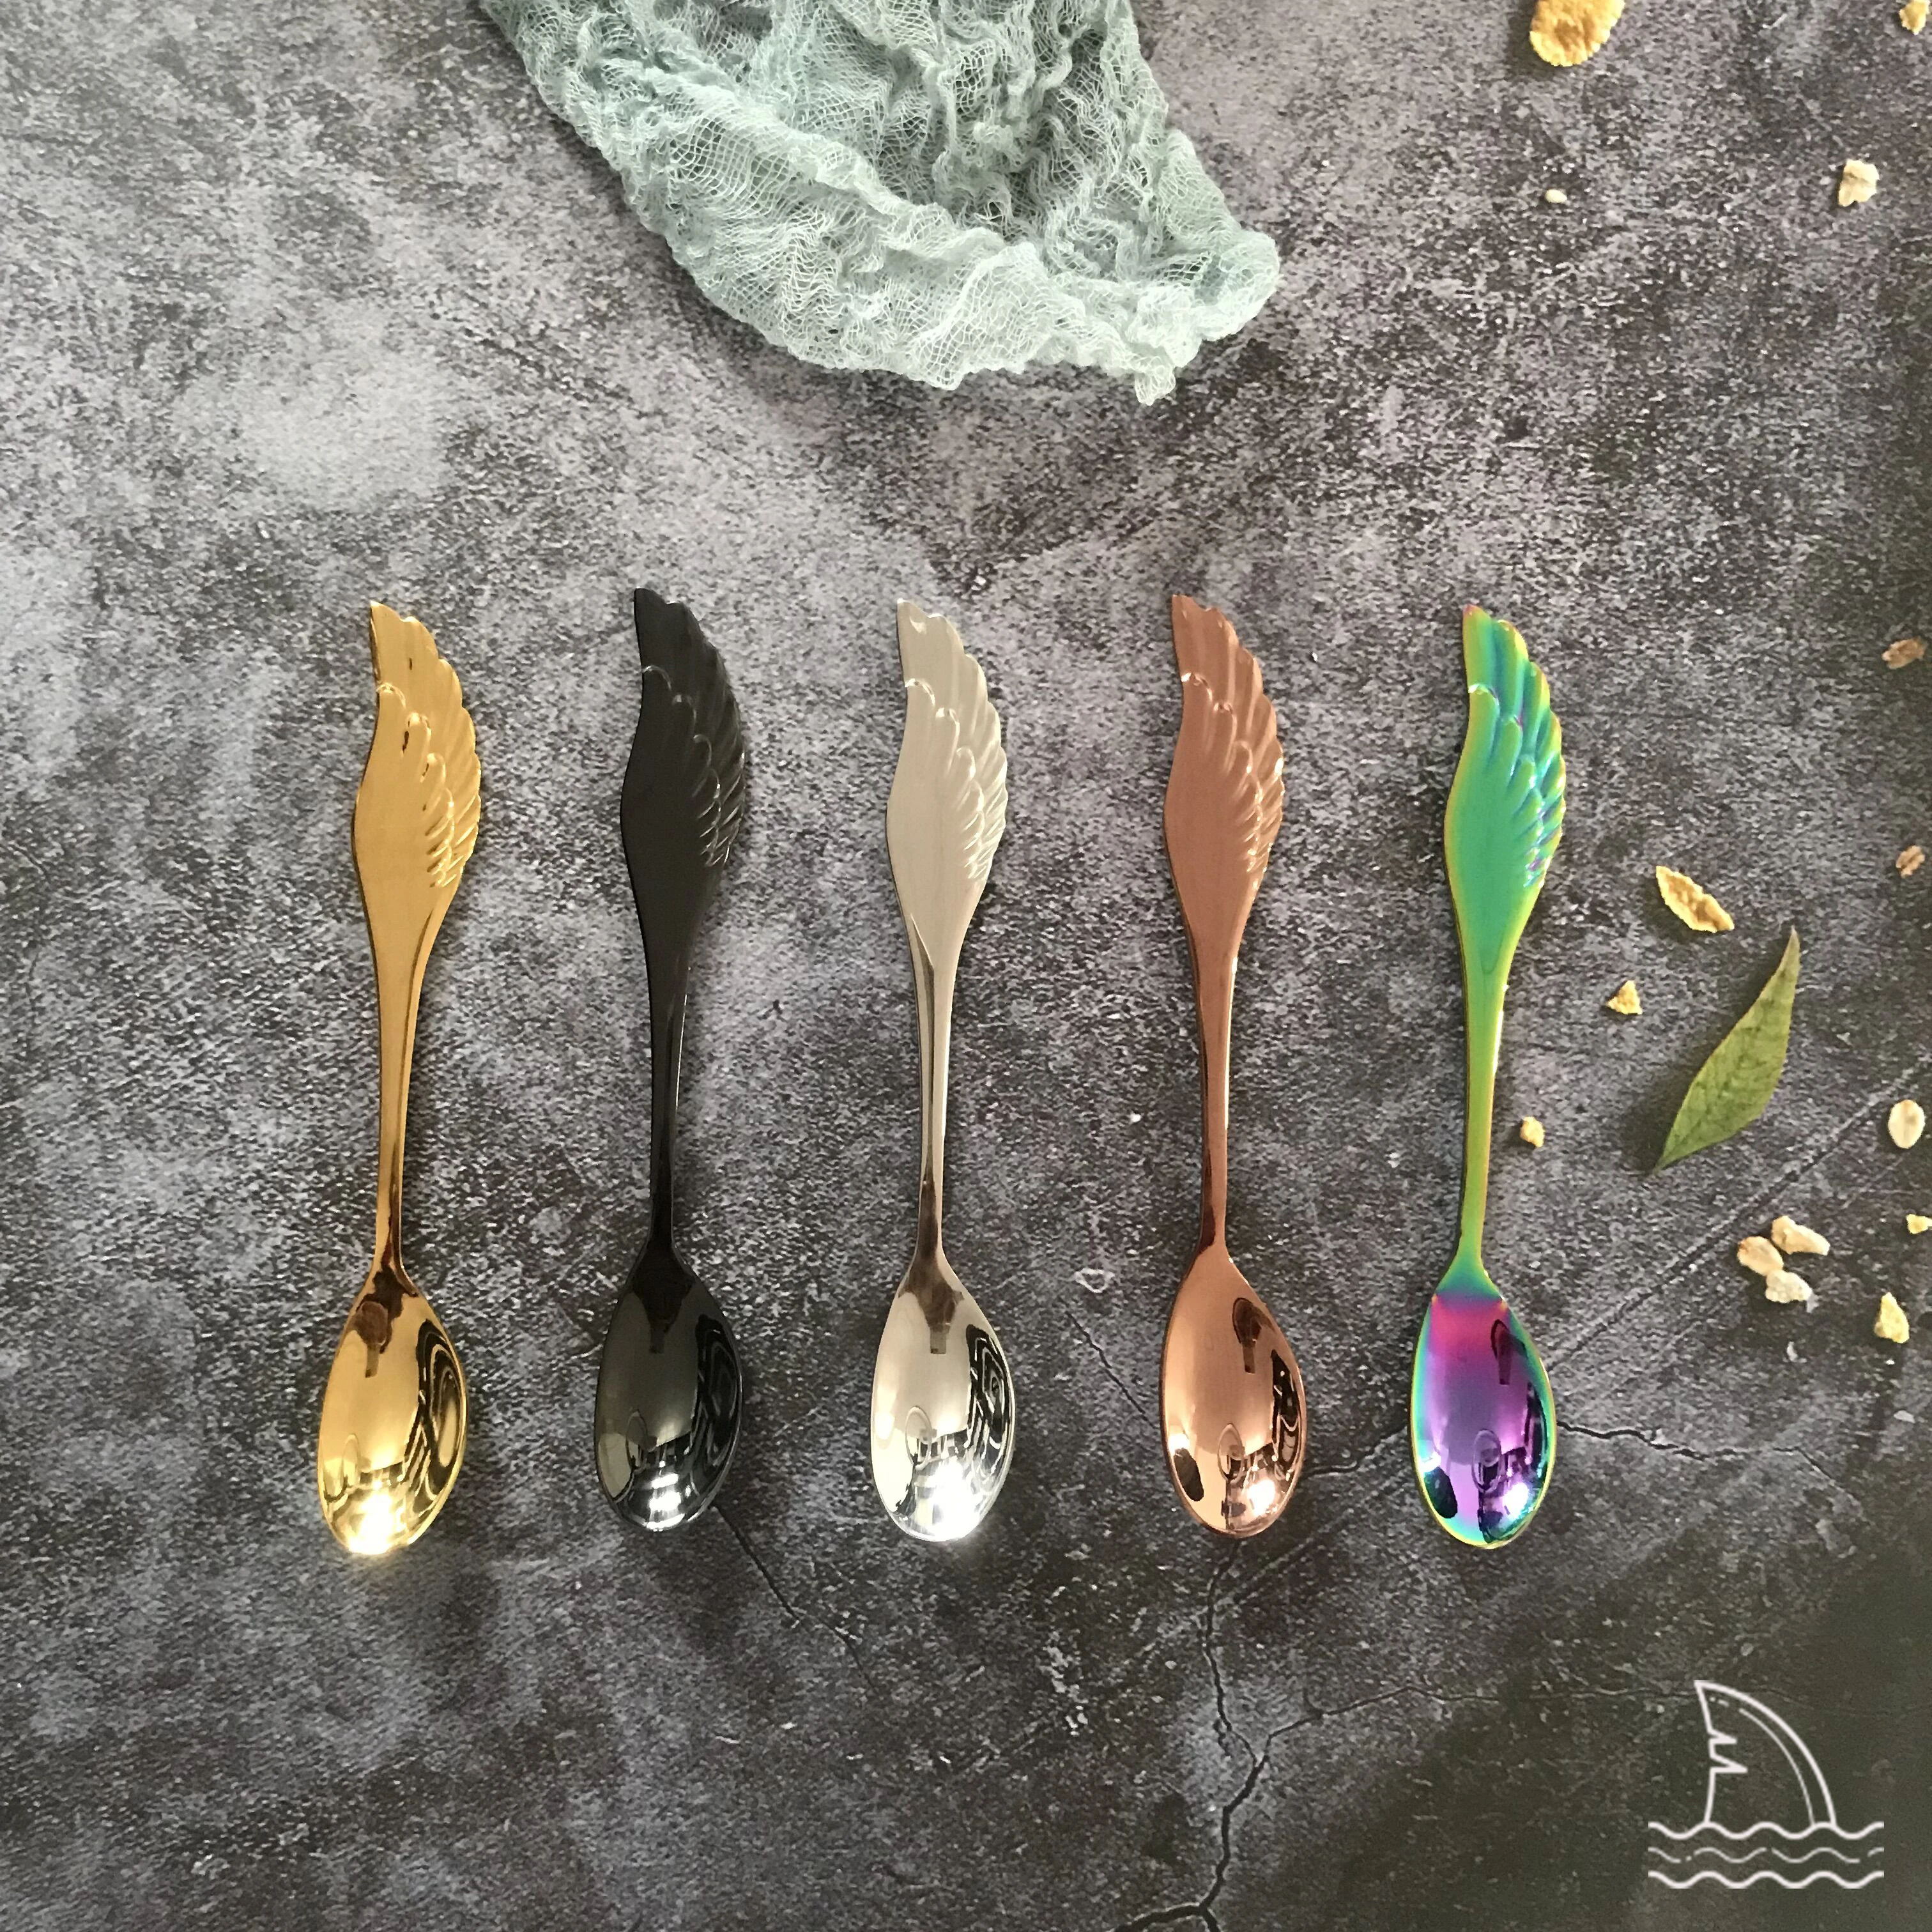 

WING Spoon Creative Funny Mini Stainless Steel Coffee Spoon Dessert Fork Ice Cream Spoon, Silver/gold/rose gold/black/rainbow/blue/purple